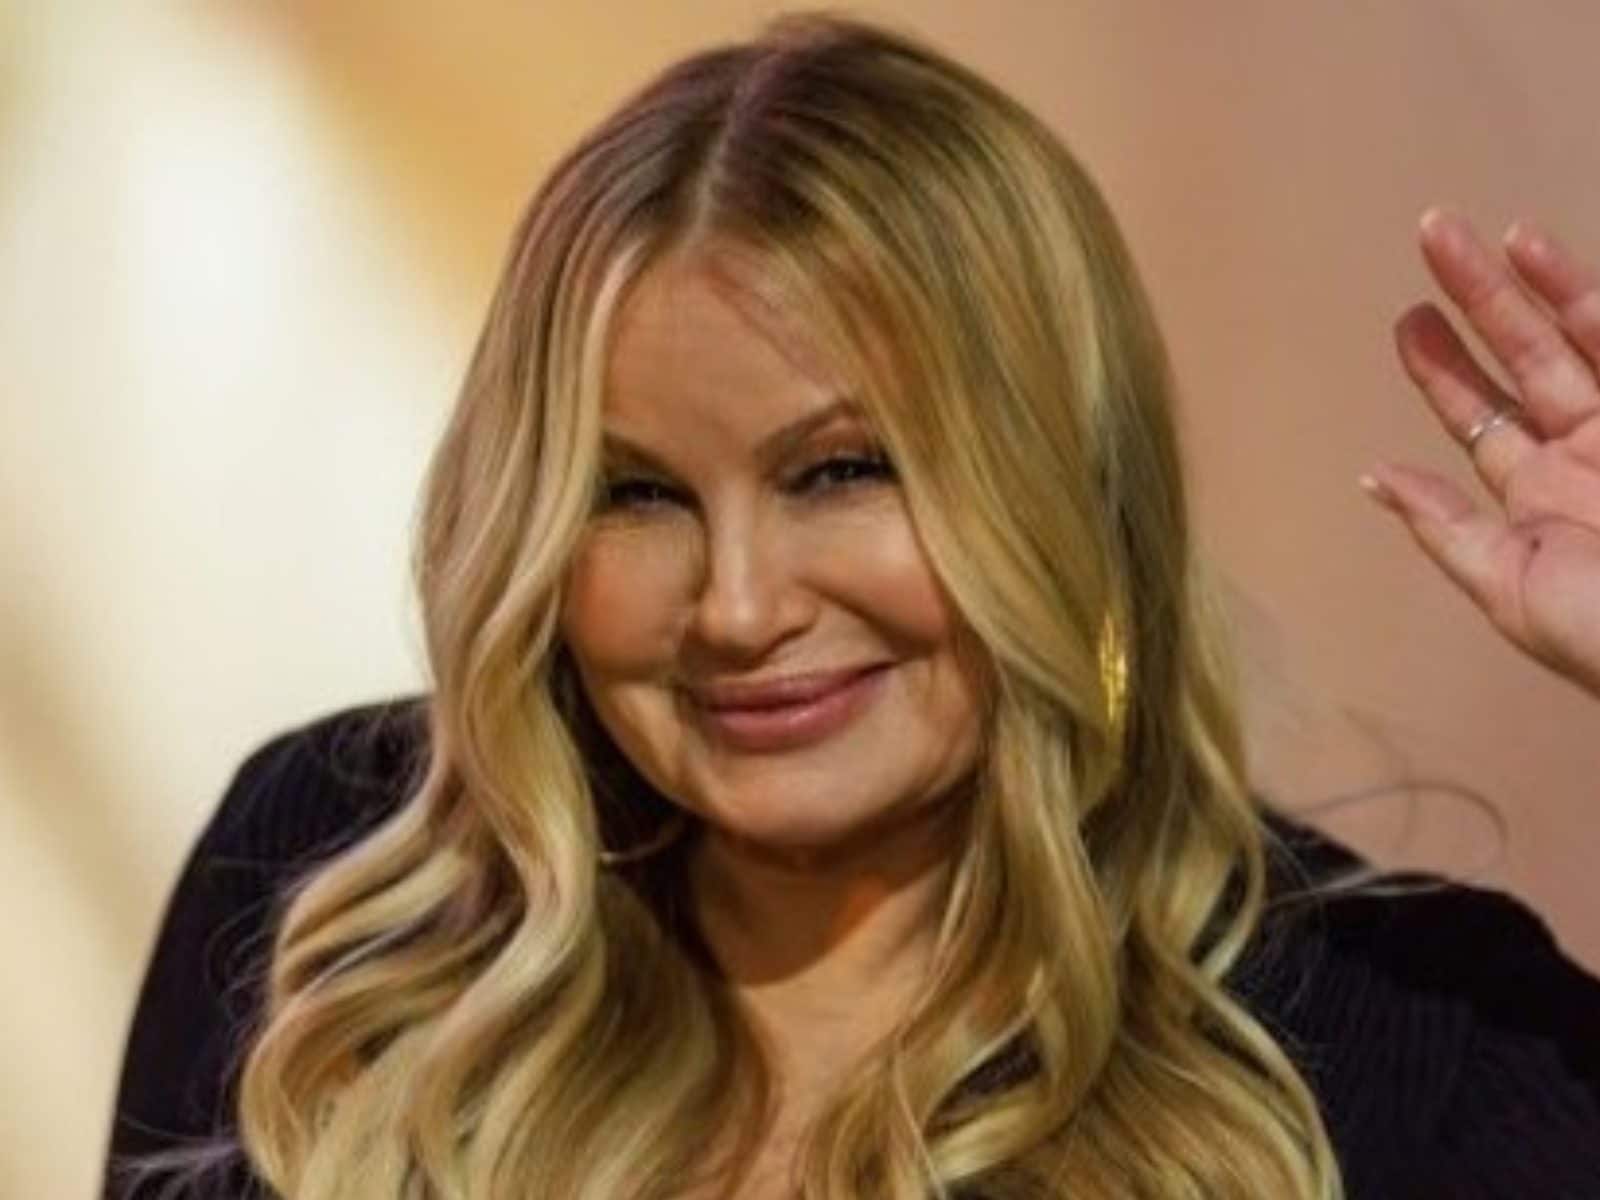 Tamanna Bhatia Fucked Video - Jennifer Coolidge Admits To Sleeping With 200 People After American Pie:  'Got Lots Of Sexual Action' - News18